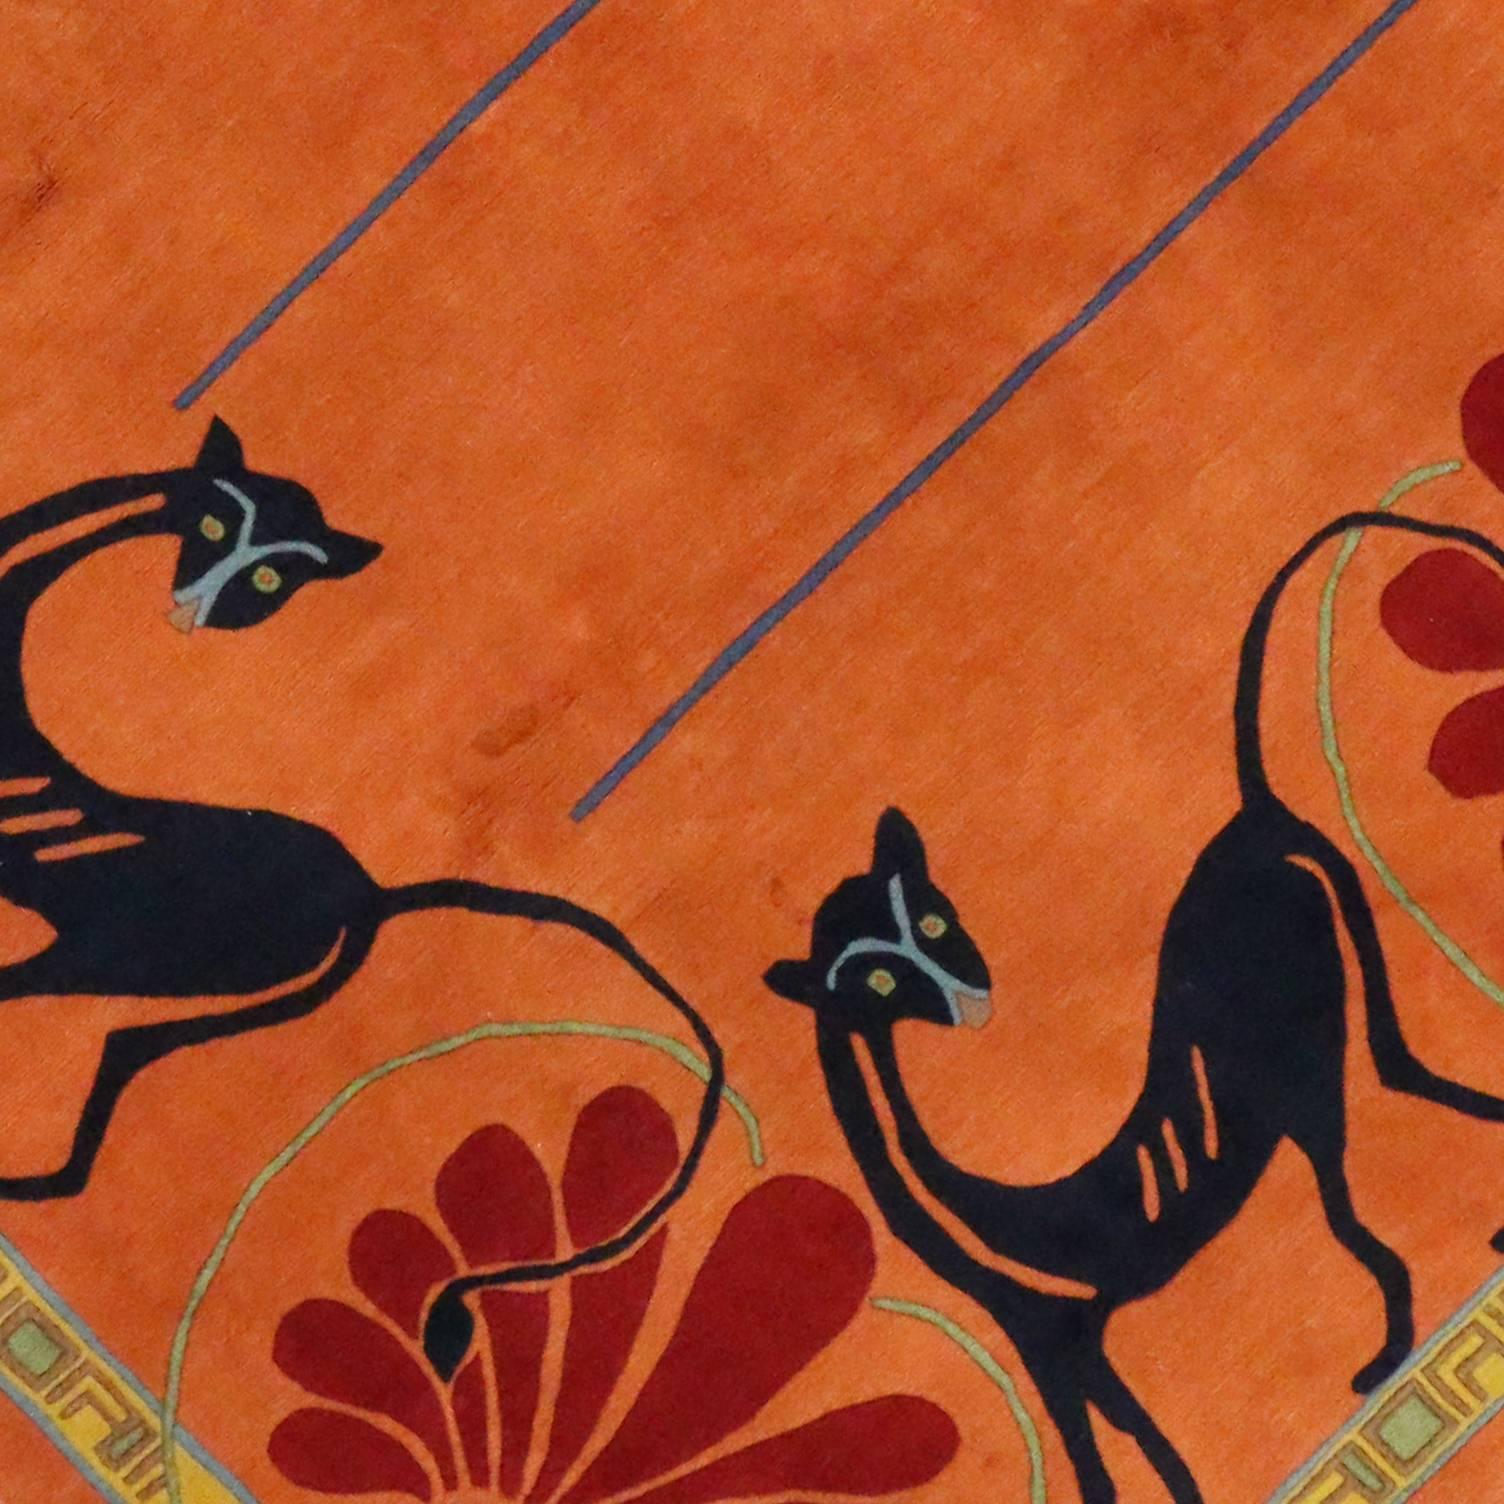 Hand-Knotted Vintage Tibetan Rug in Orange with Black Cats, Contemporary Rug from Tibet